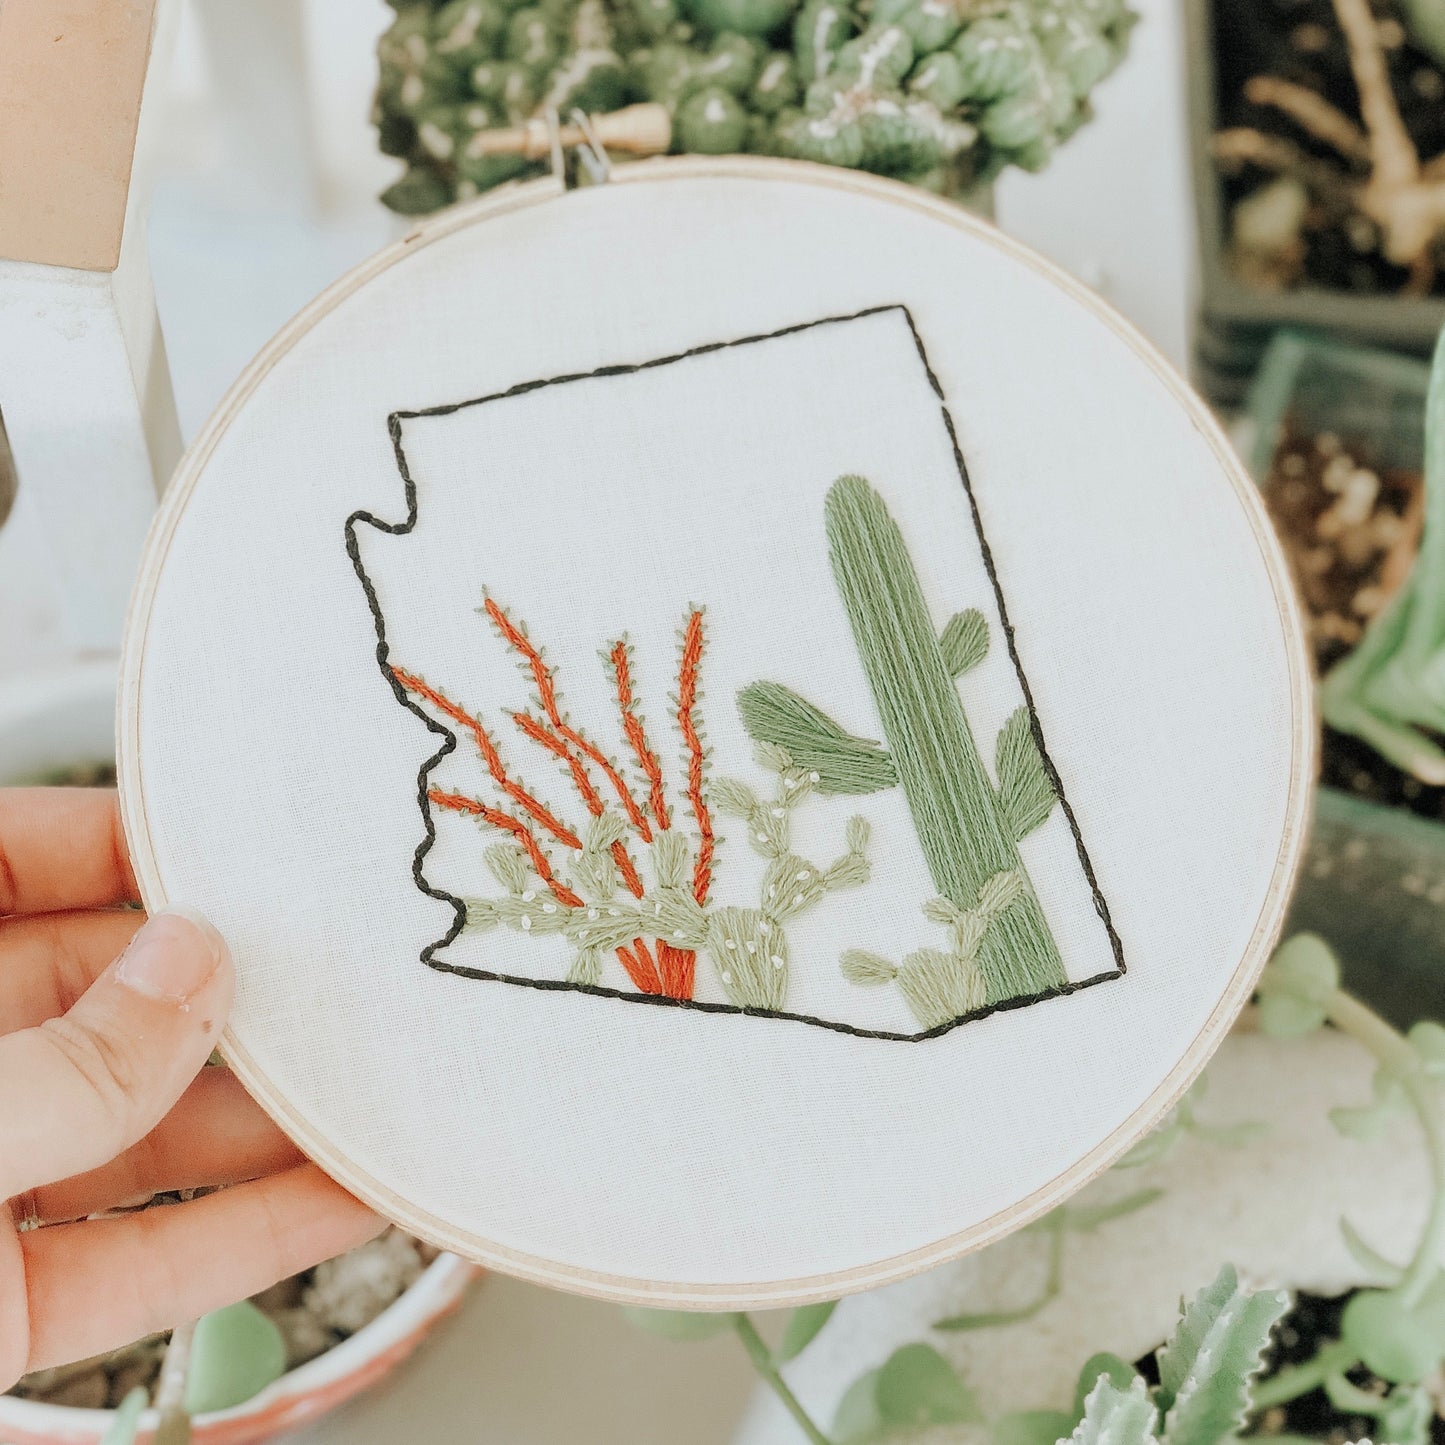 Embroidery Workshop - Saturday, March 23rd - 7-9PM